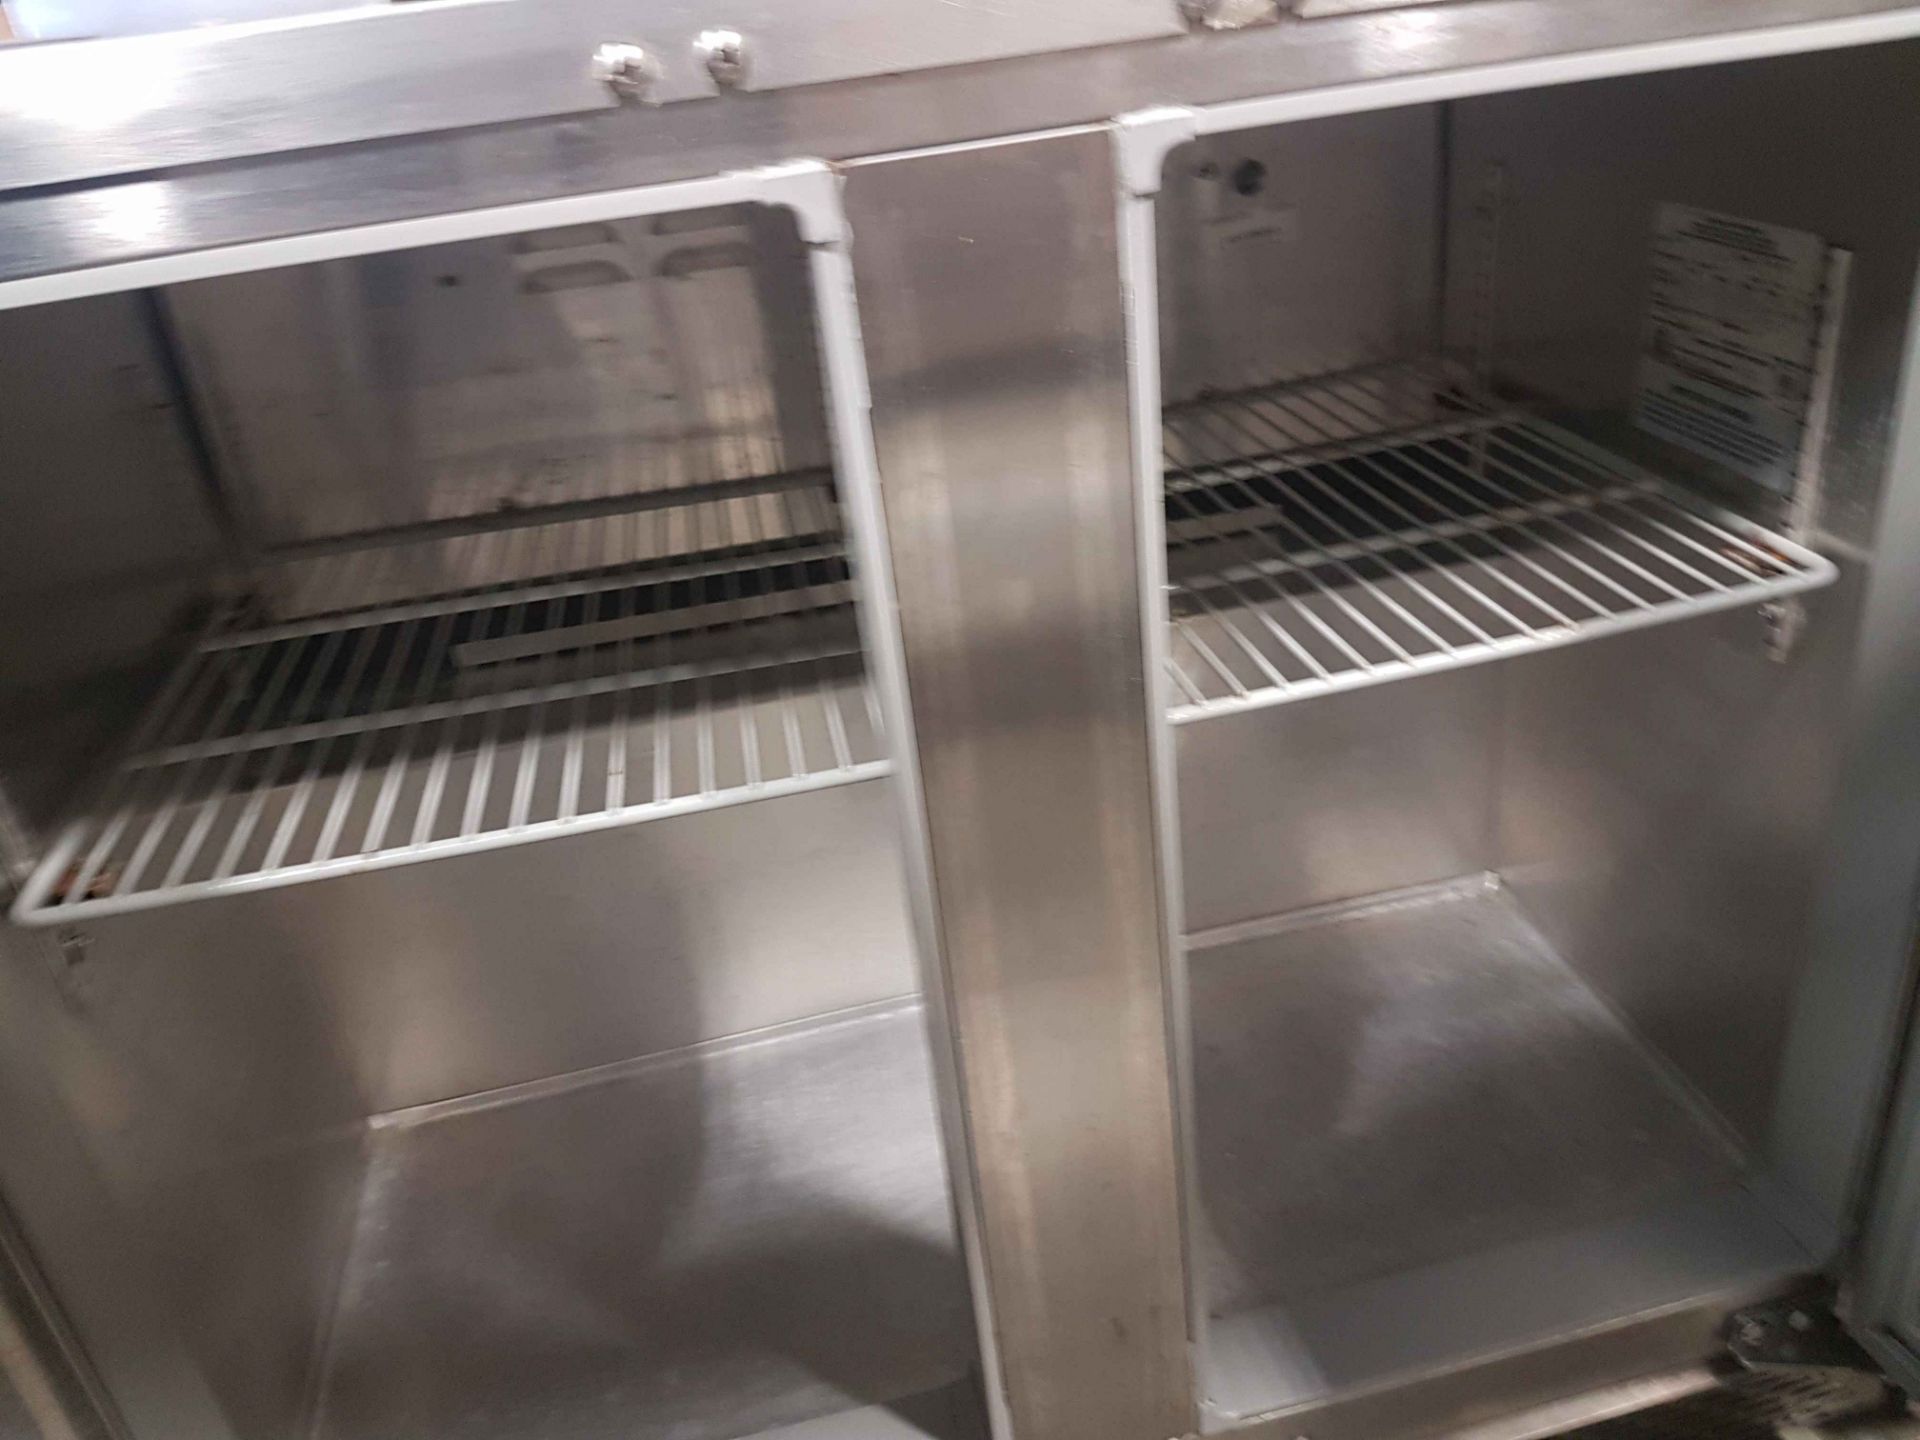 Continental 36" Under Counter Cooler - Model UC36 - Image 2 of 3